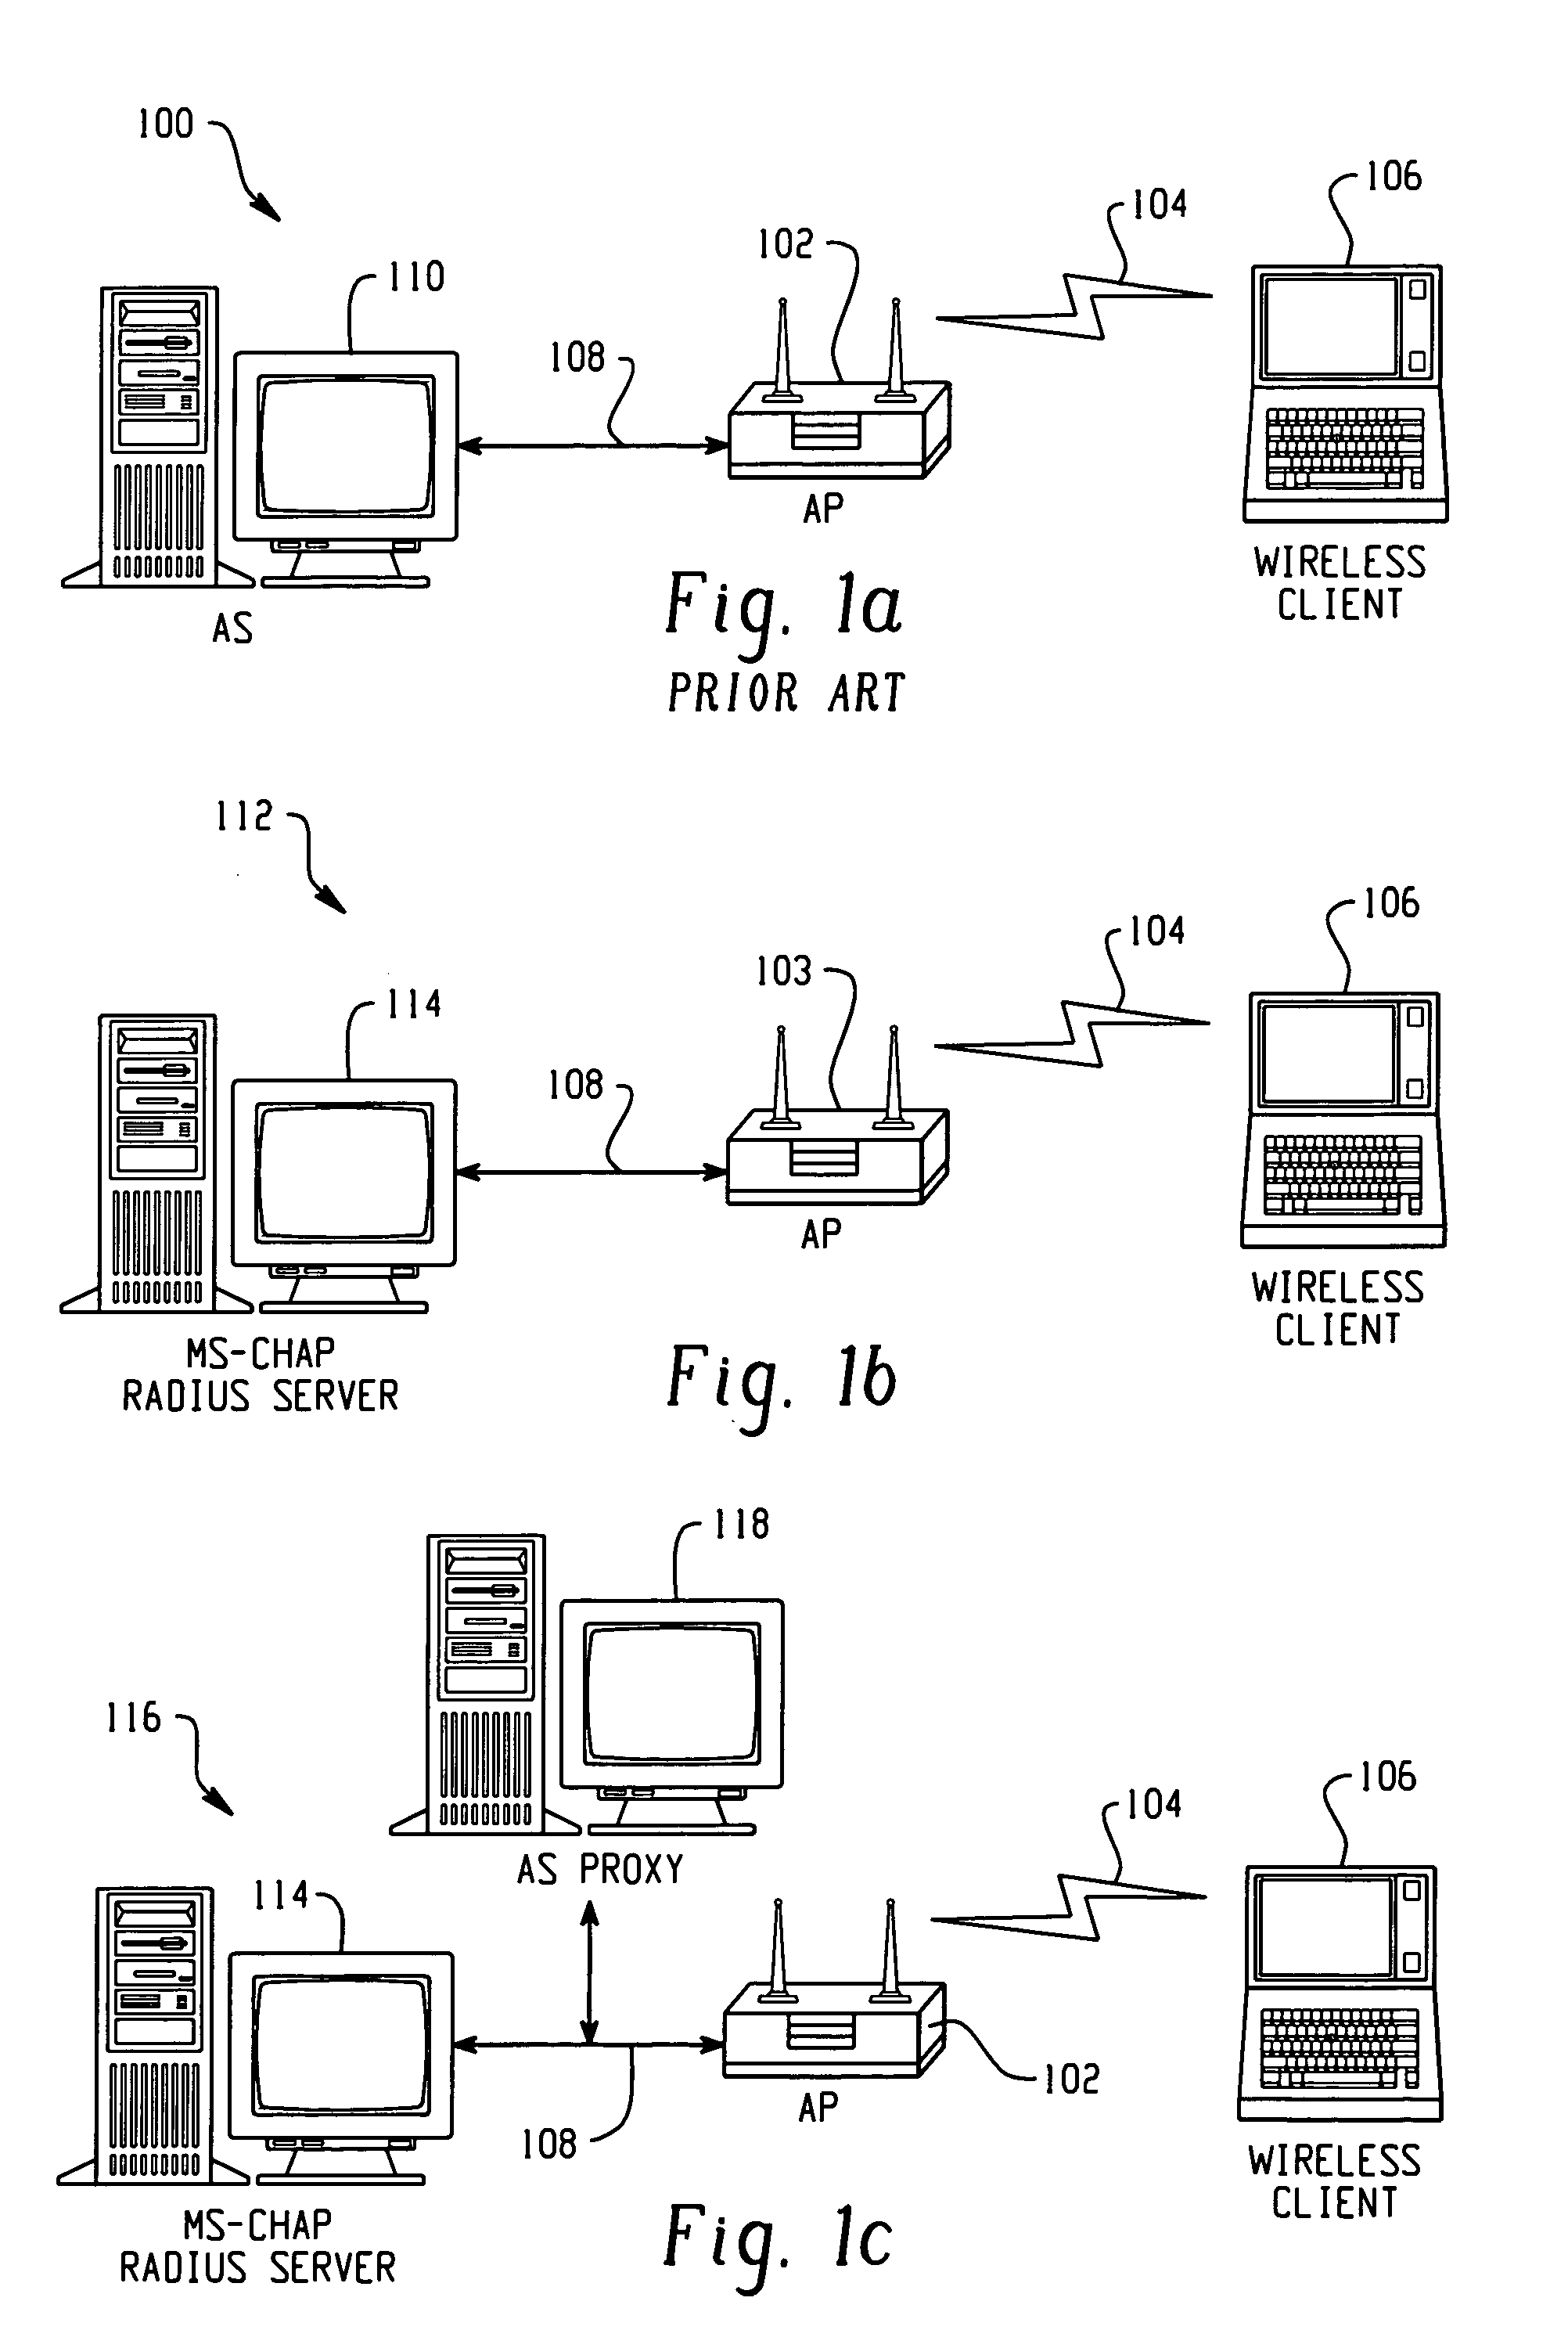 System and method of controlling access by a wireless client to a network that utilizes a challenge/handshake authentication protocol